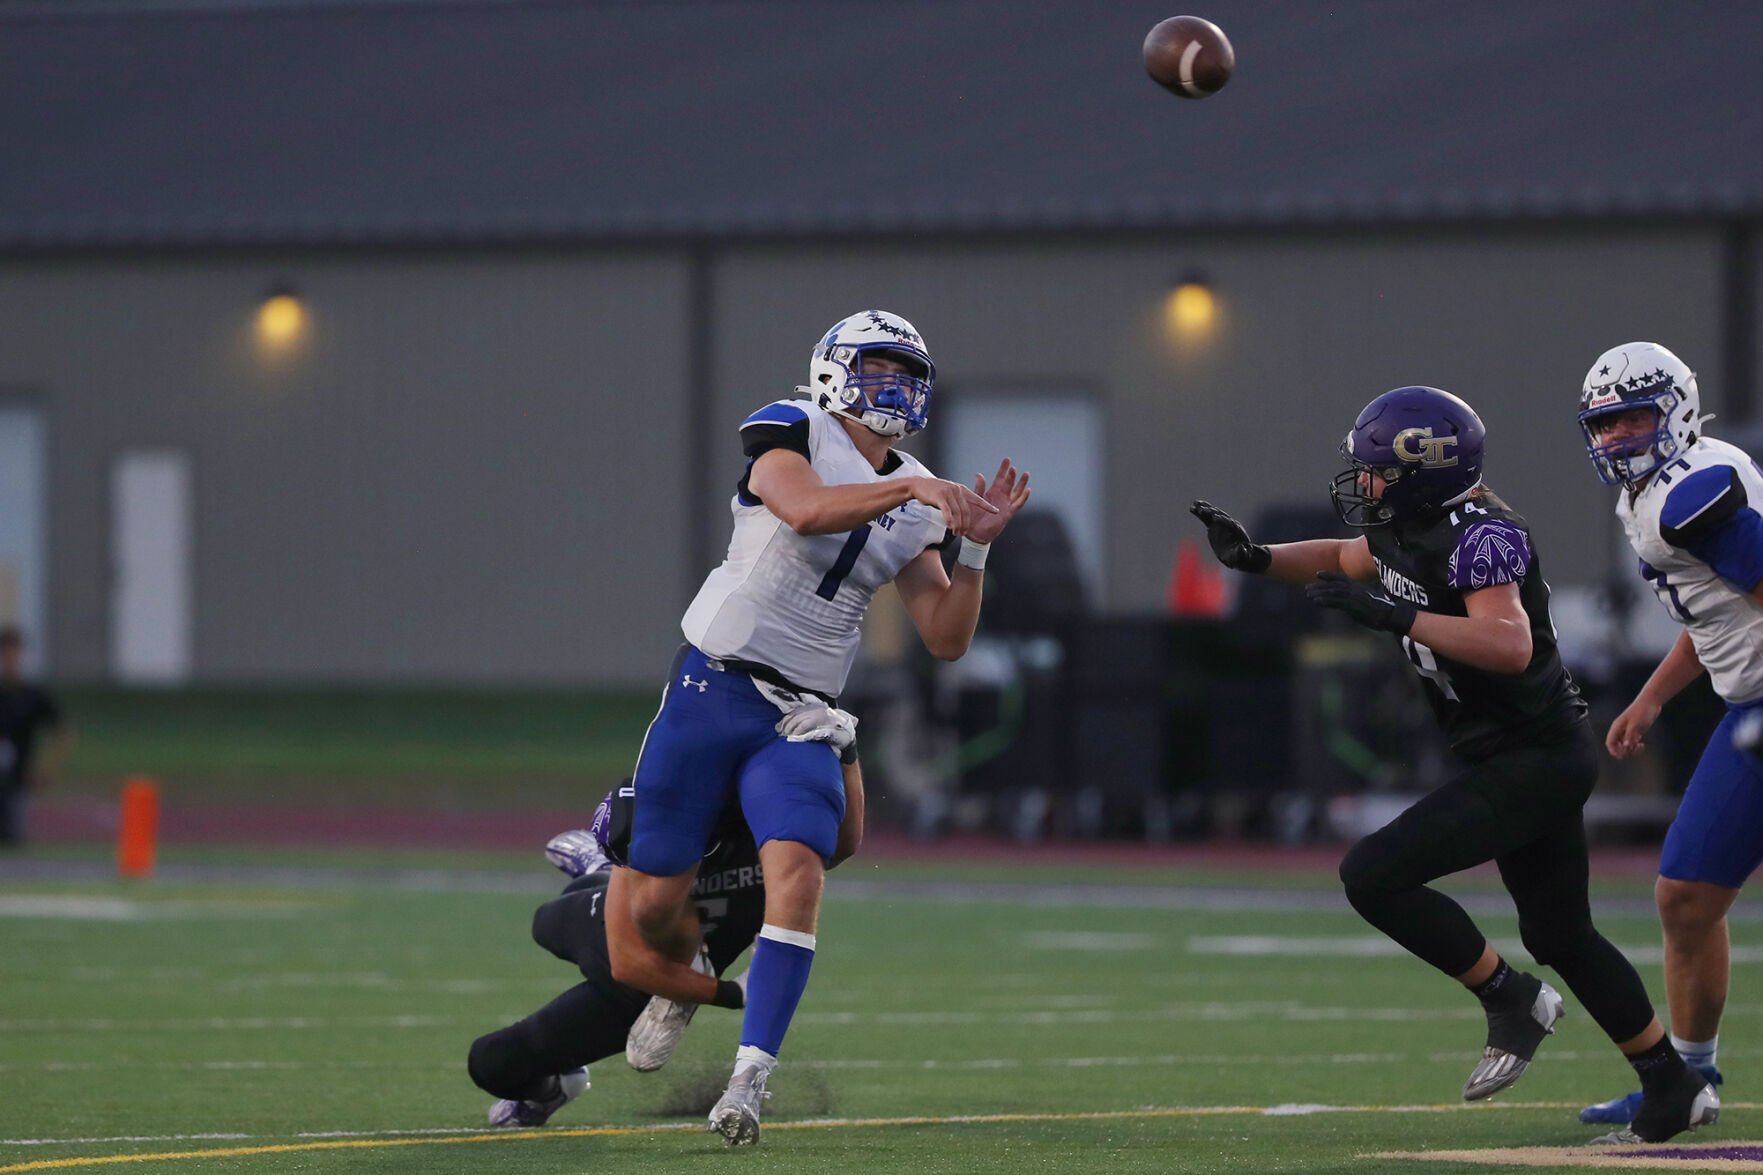 Kearney High football looks to bounce back after first loss, emphasizing pressure on the quarterback and road success